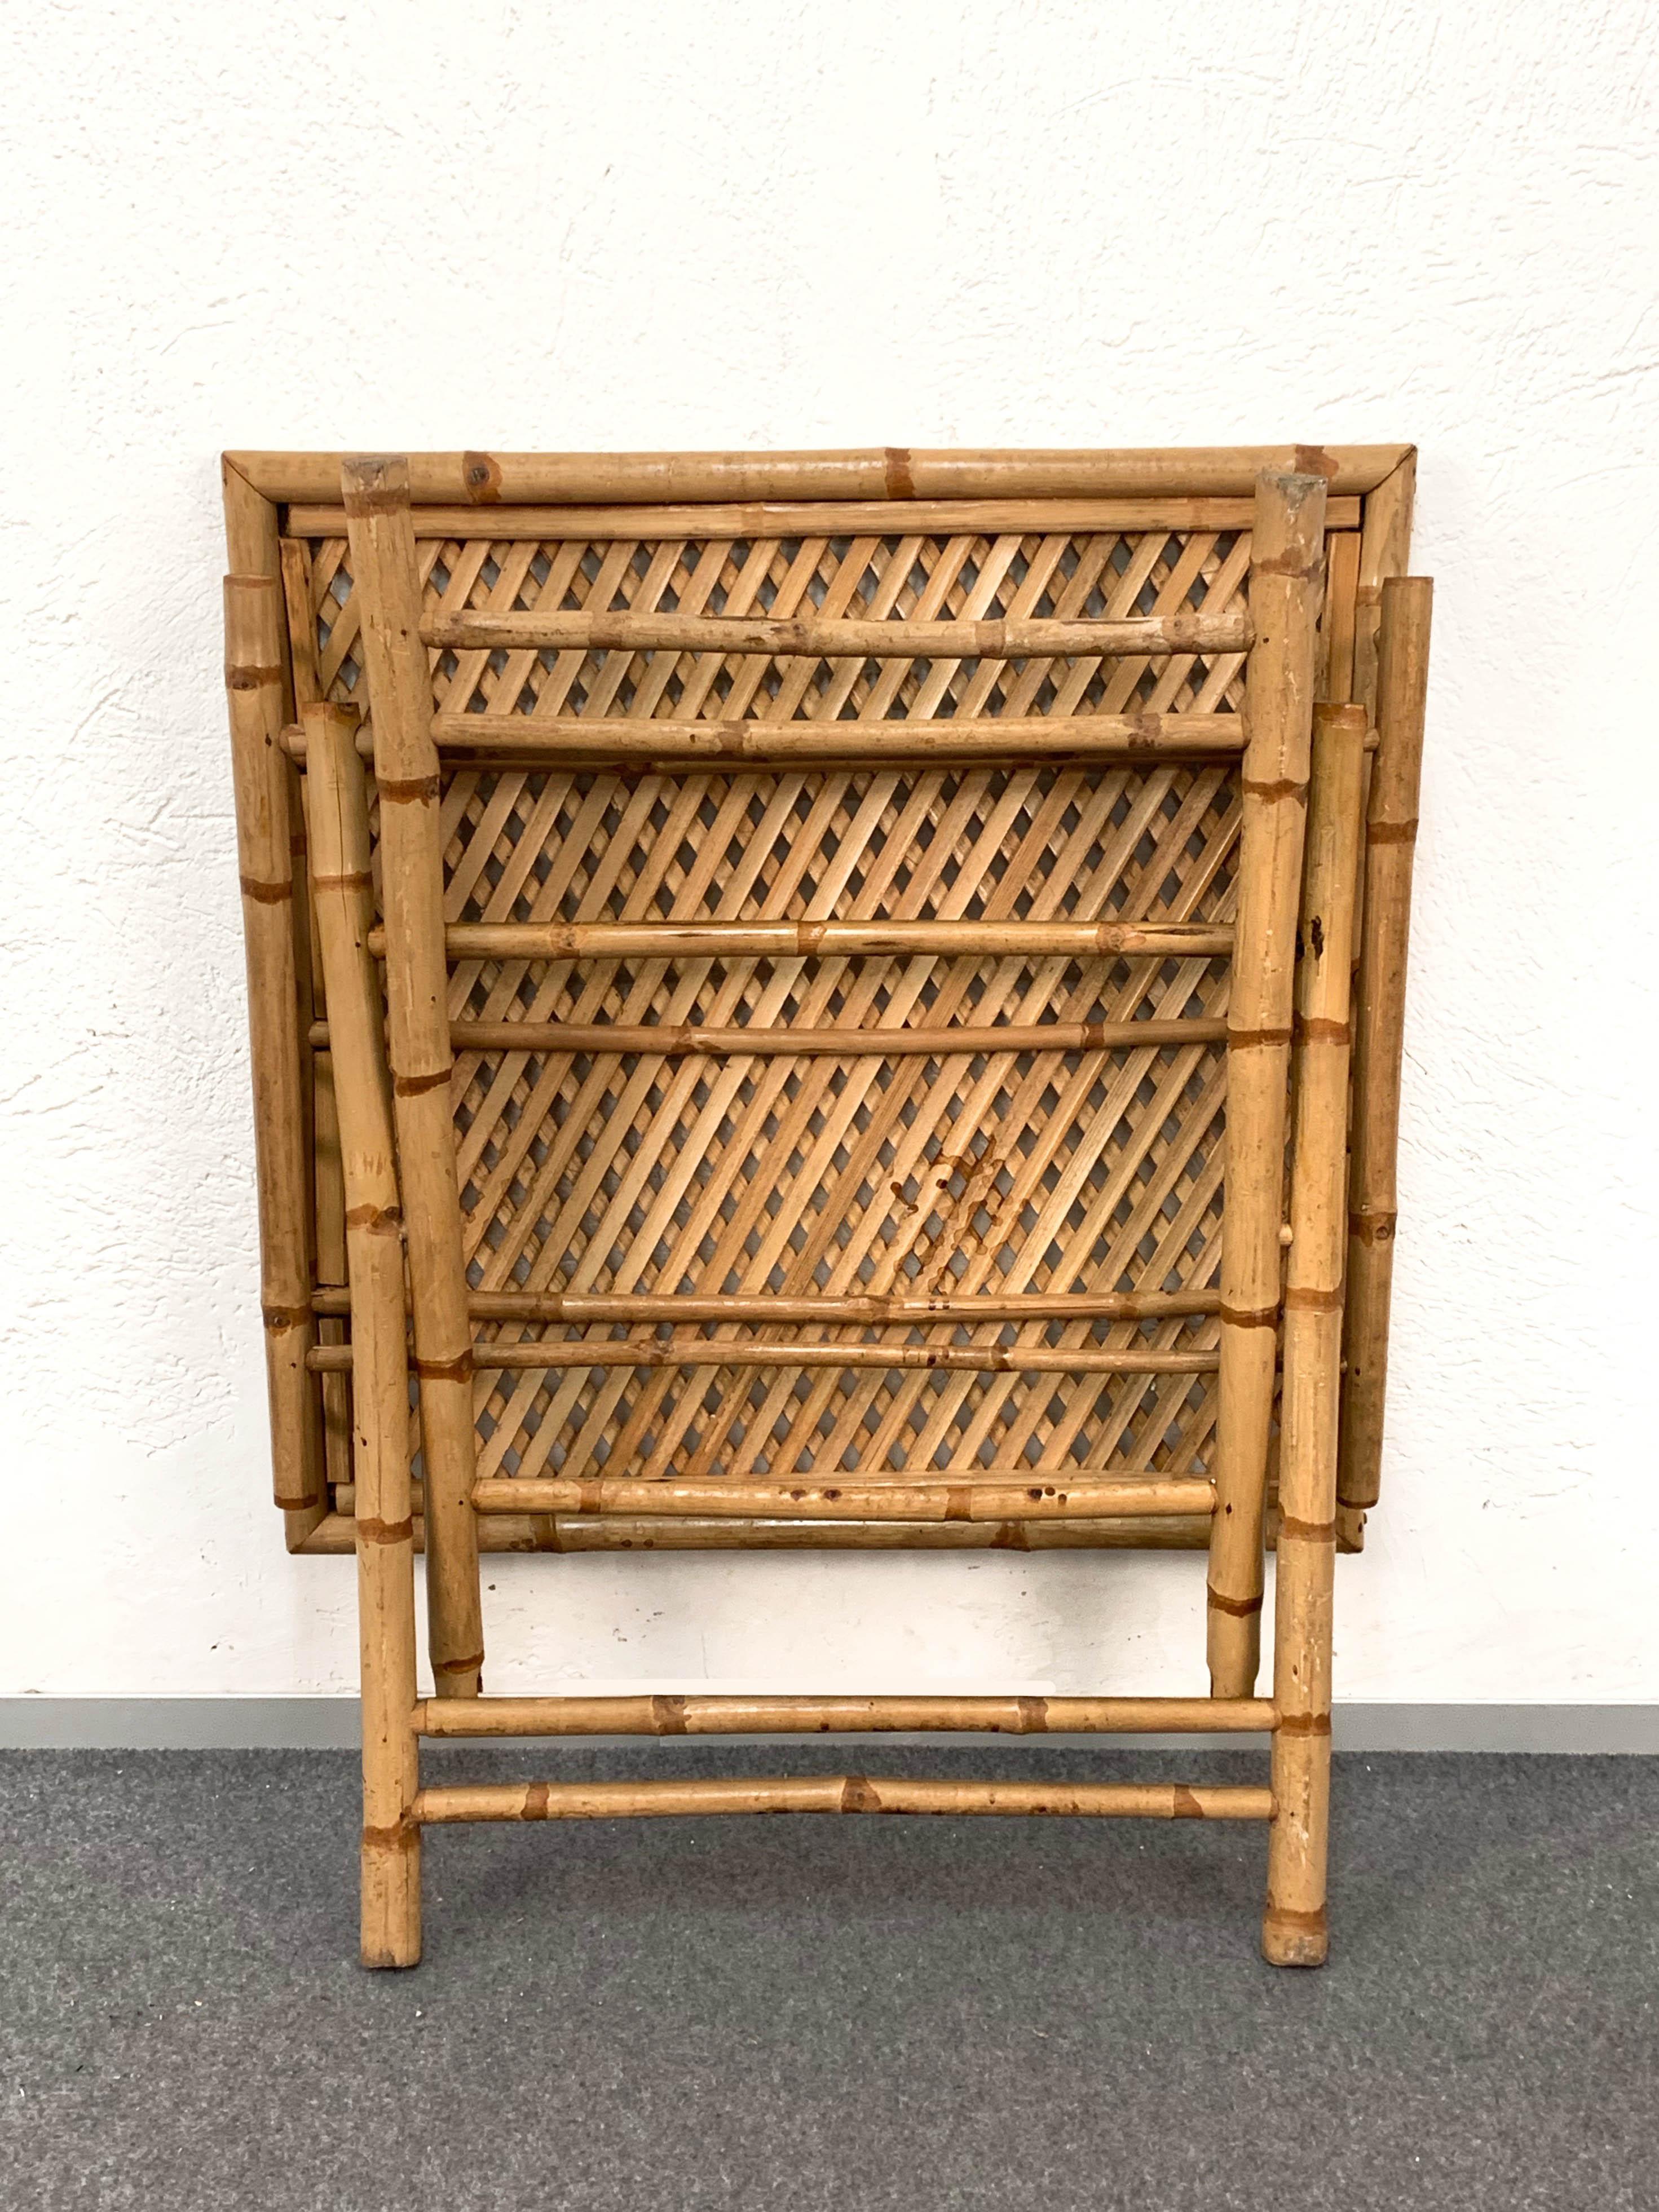 Midcentury Bamboo and Rattan Italian Foldable Table and Four Chairs, 1960s For Sale 7